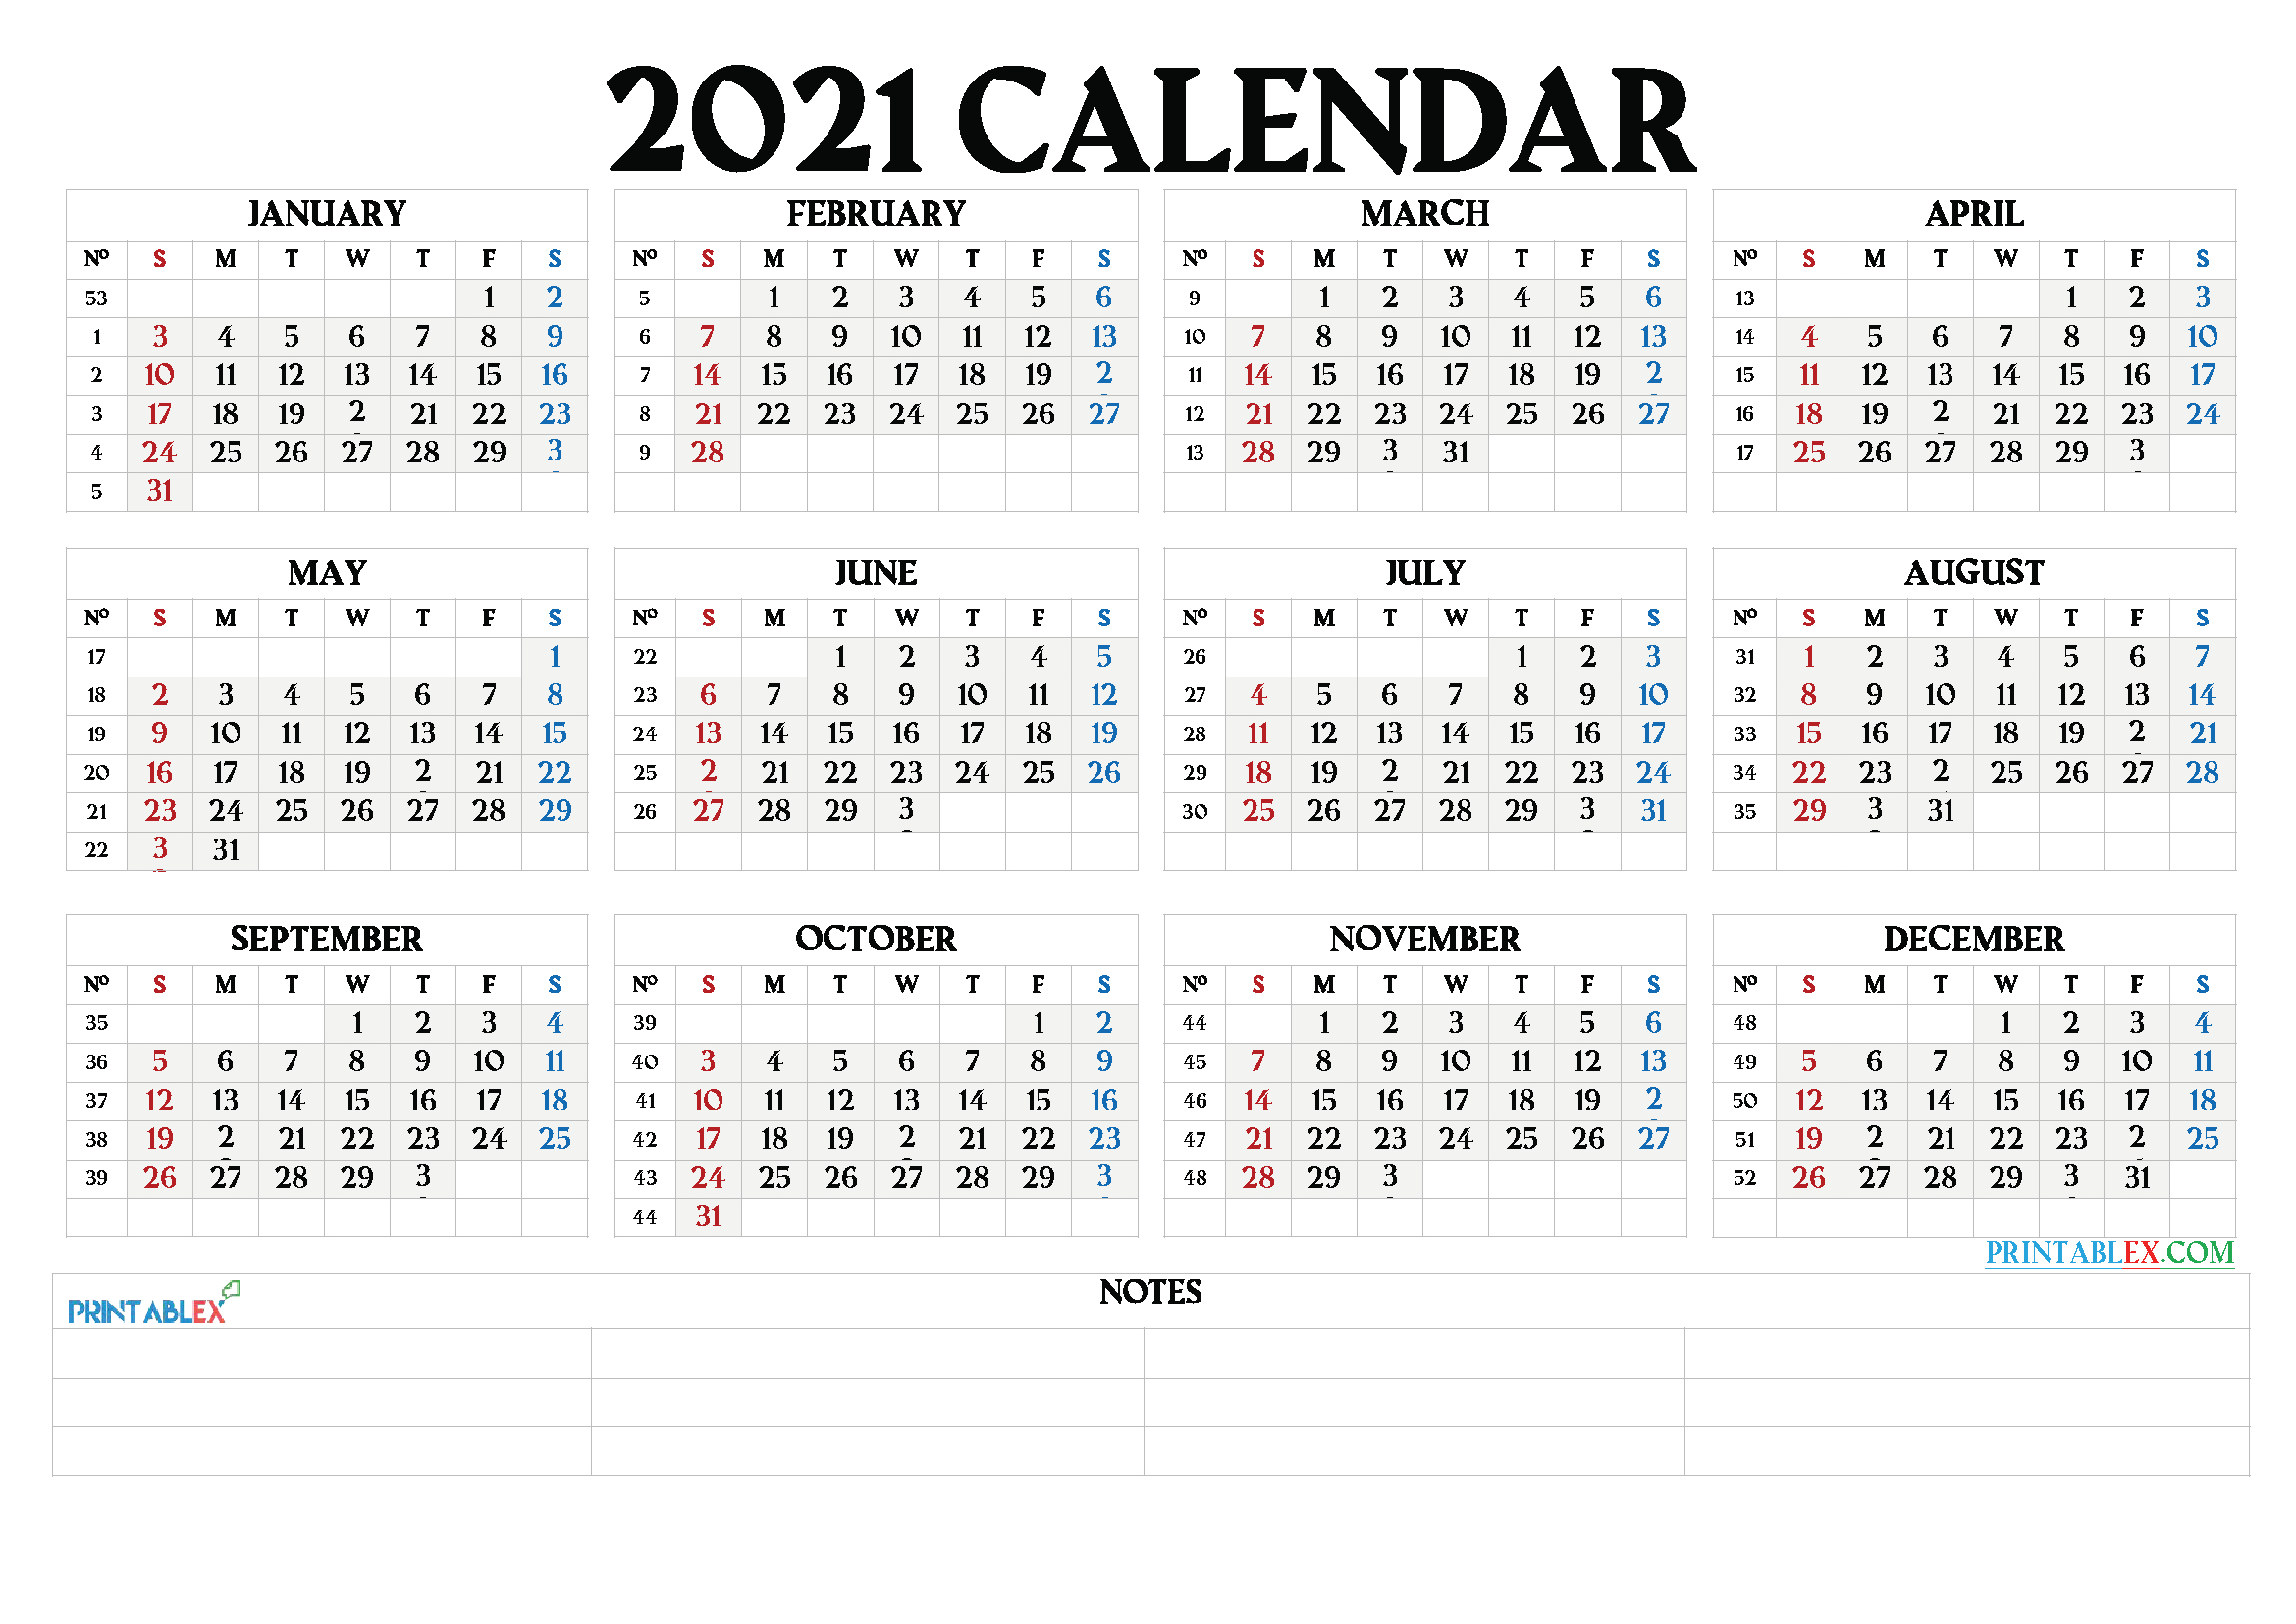 Printable 2021 Calendar By Month - 21Ytw66-2021 Yearly Calendar Printable Free With Notes